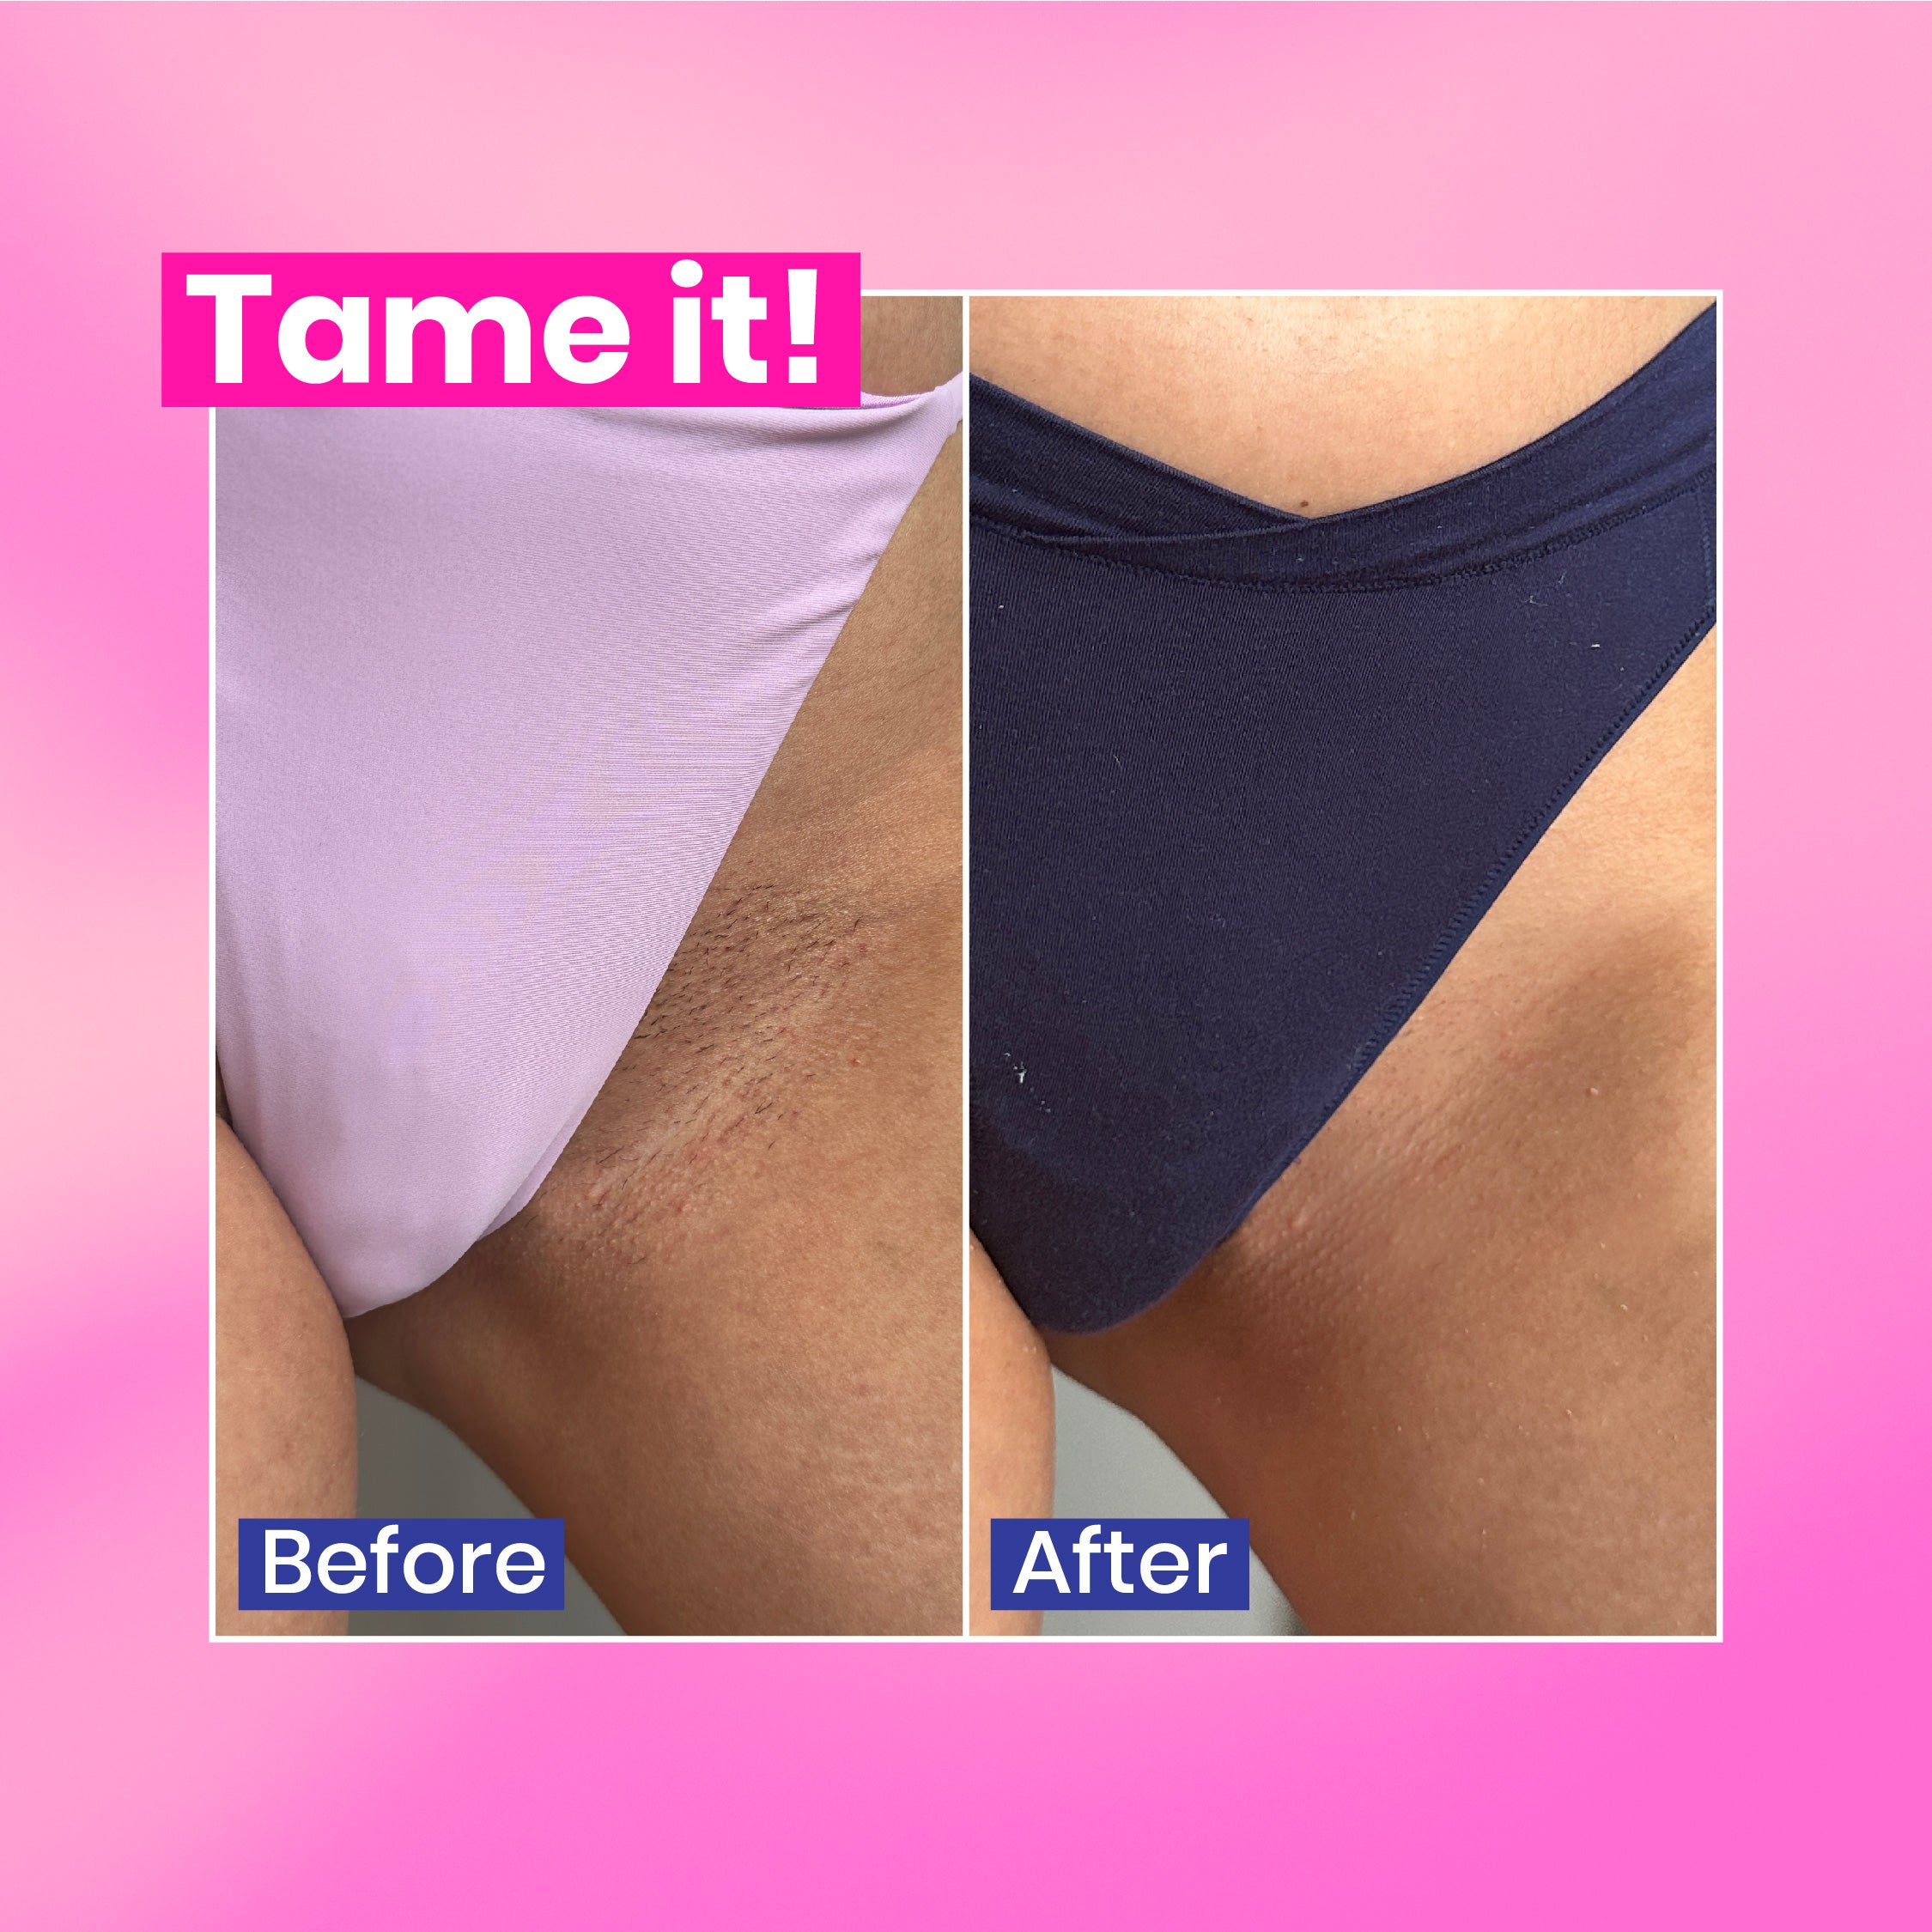 Tame it! Hair Removal Cream Dolphin Smooth Bundle